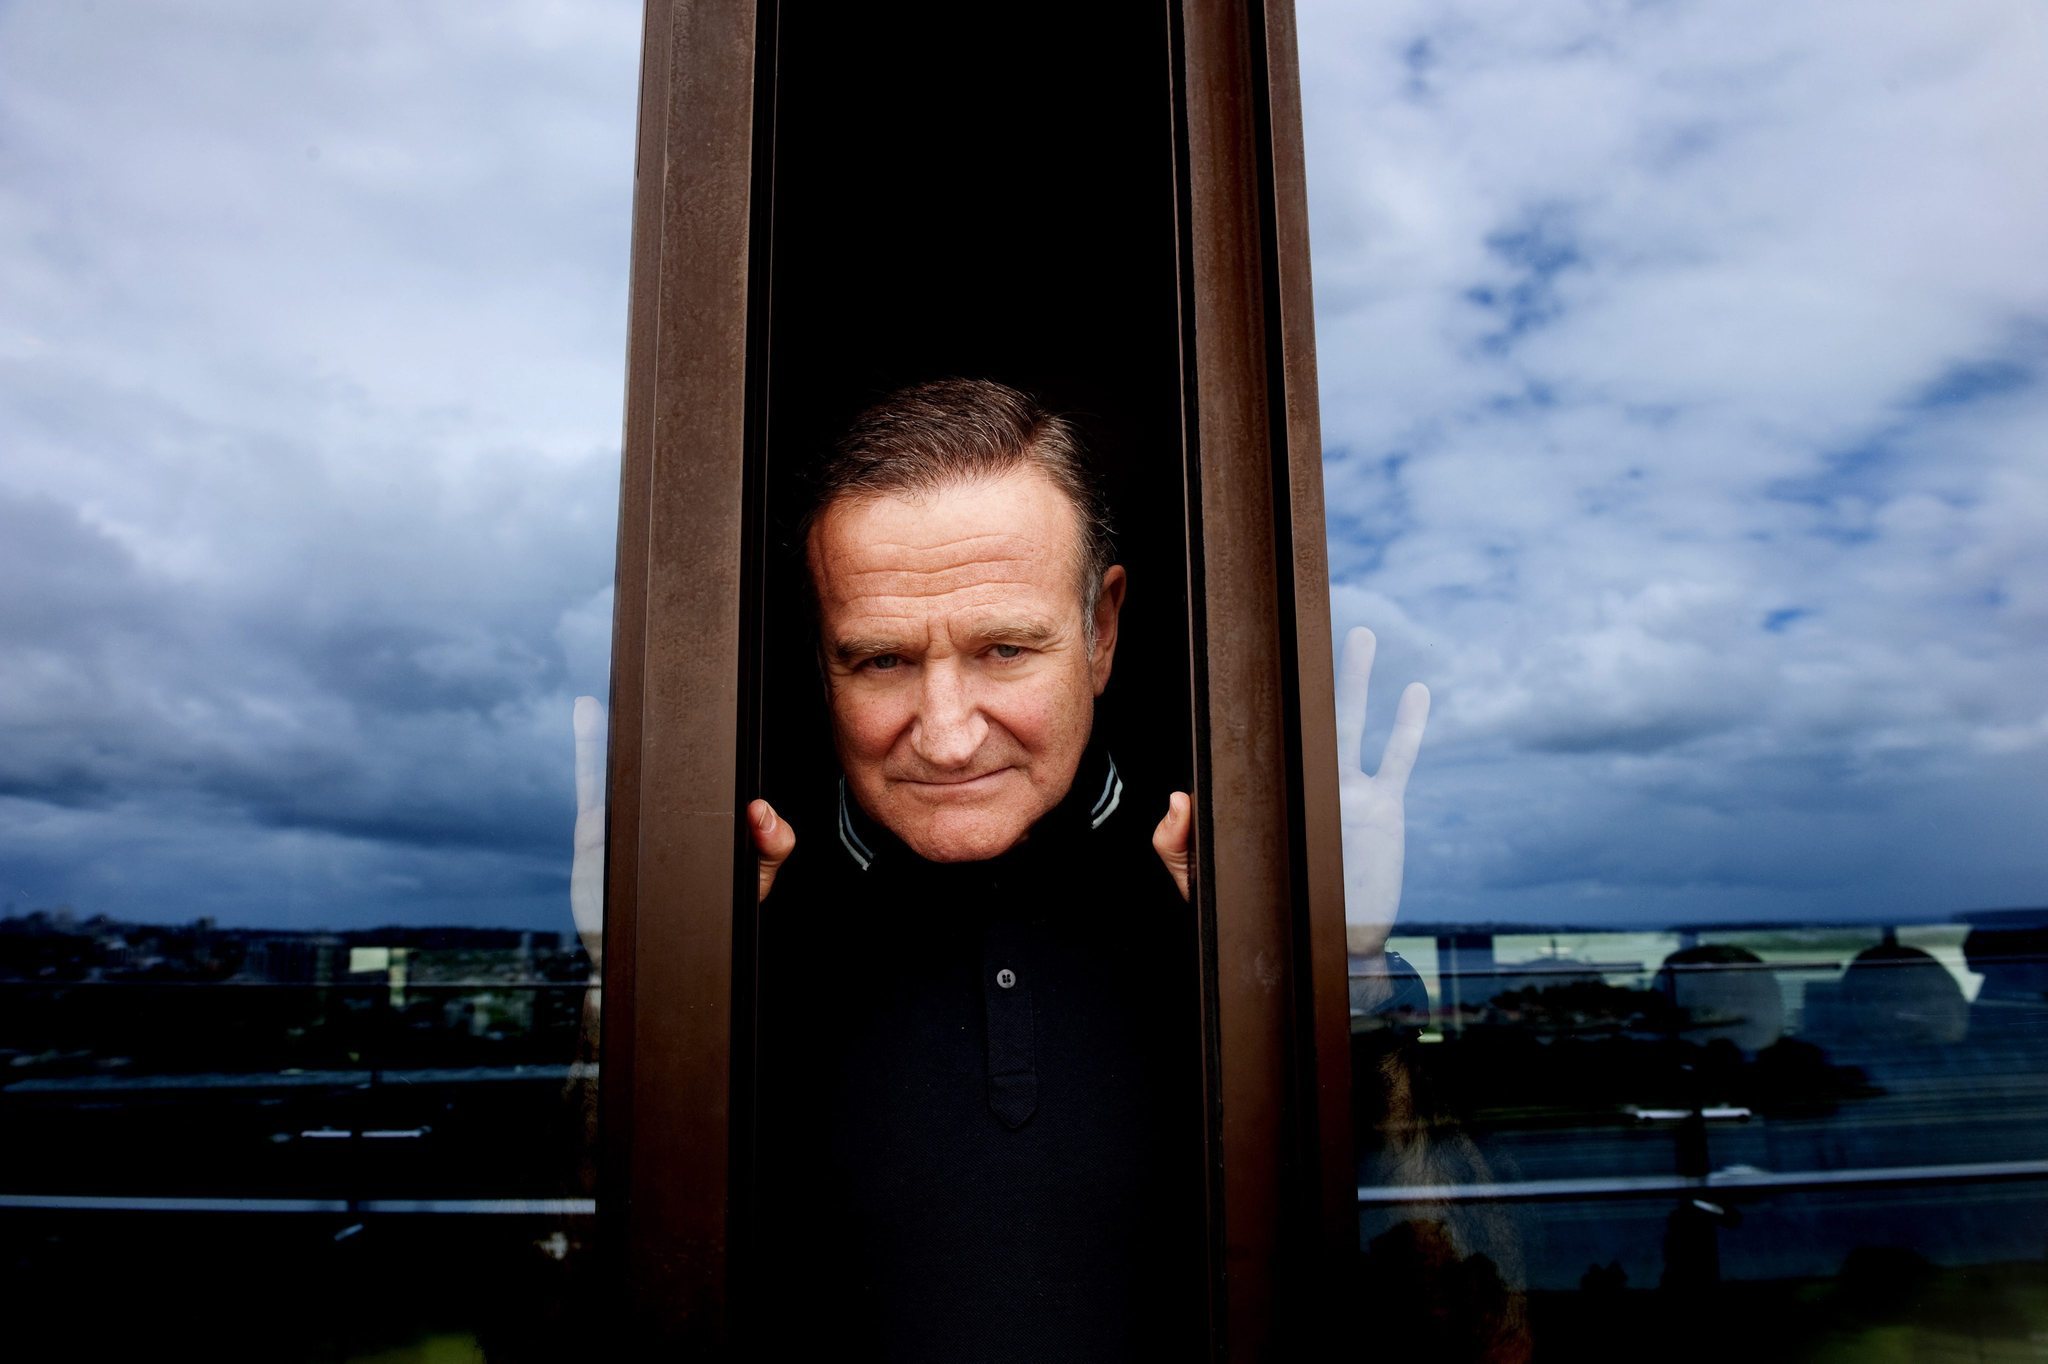 Robin Williams suicide: Friends saw signs - Chicago Tribune